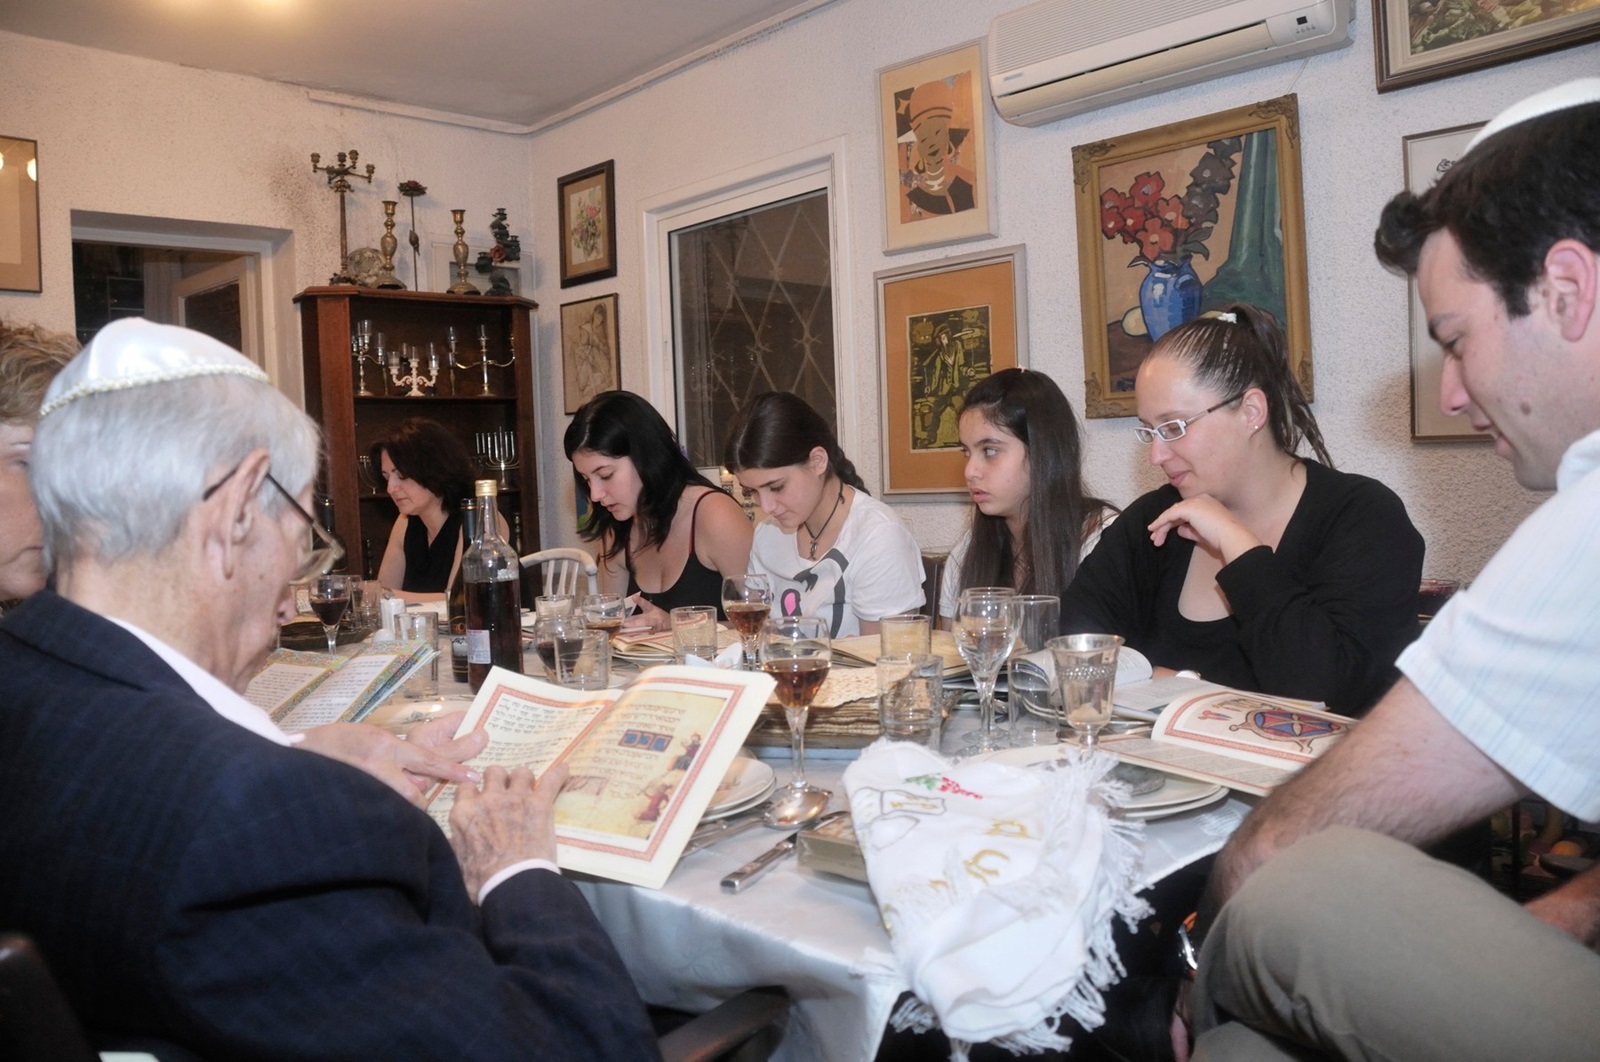 family sitting around a table set for a Jewish Festive meal on Passover transliterated as Pesach or Pesah also called chag HaMatzot Festival of Matzot,Image: 12510701, License: Rights-managed, Restrictions: , Model Release: yes, Credit line: PhotoStock-Israel / Alamy / Profimedia